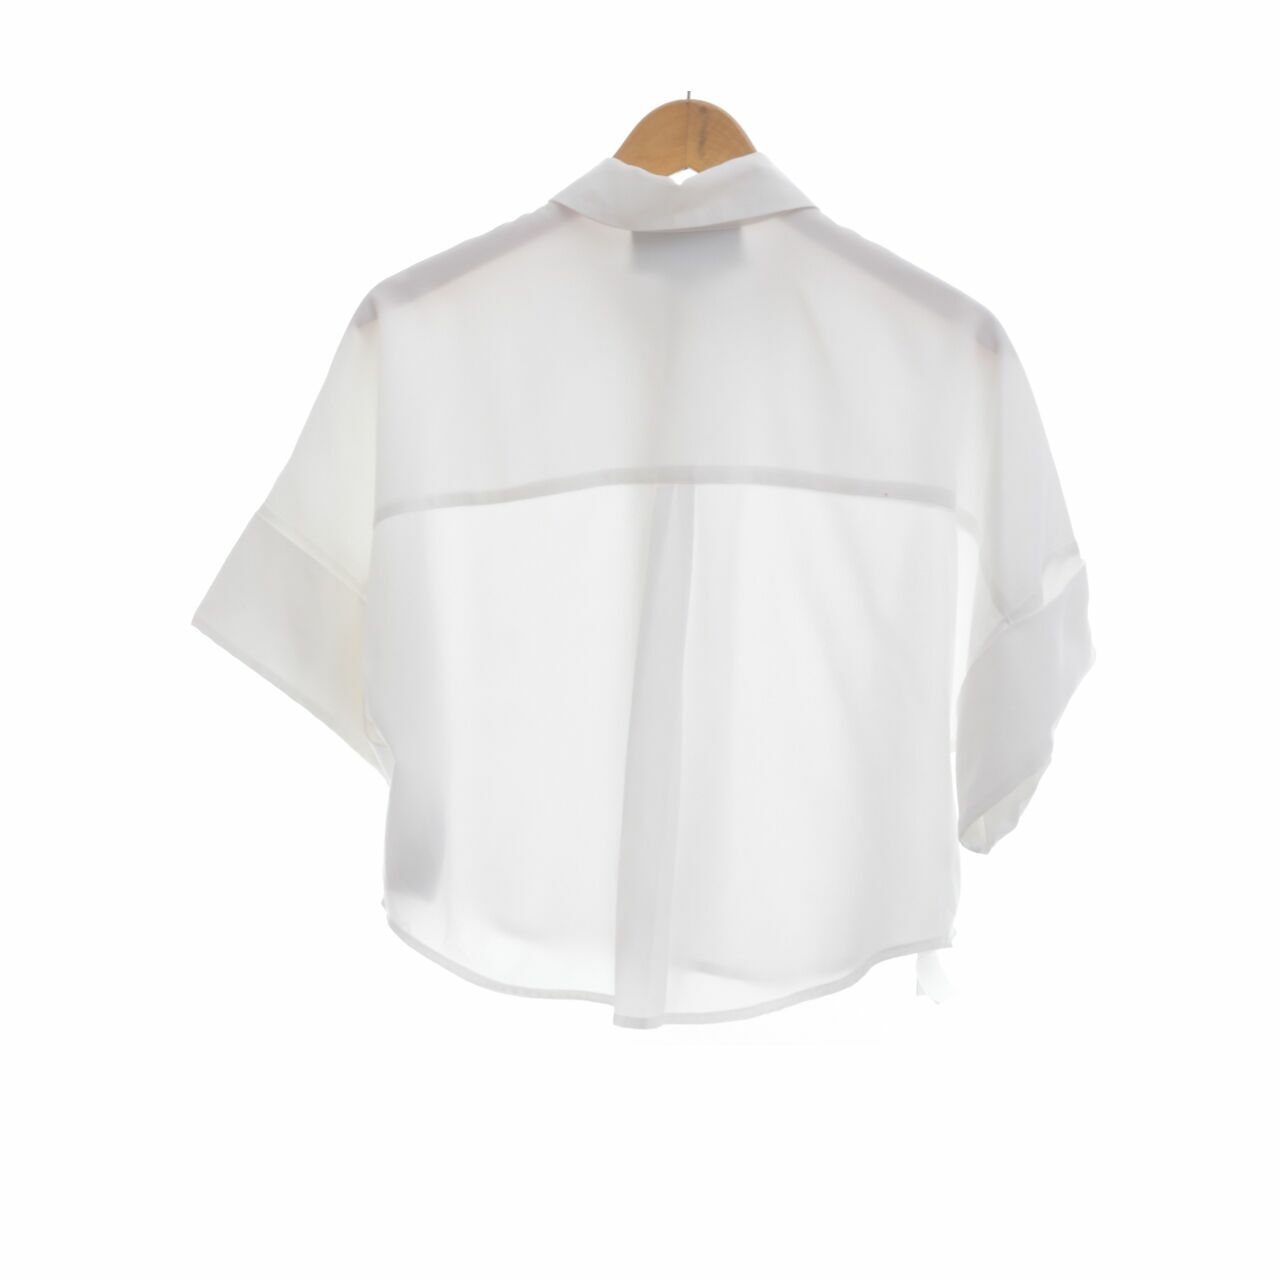 the fifth label White Shirt 